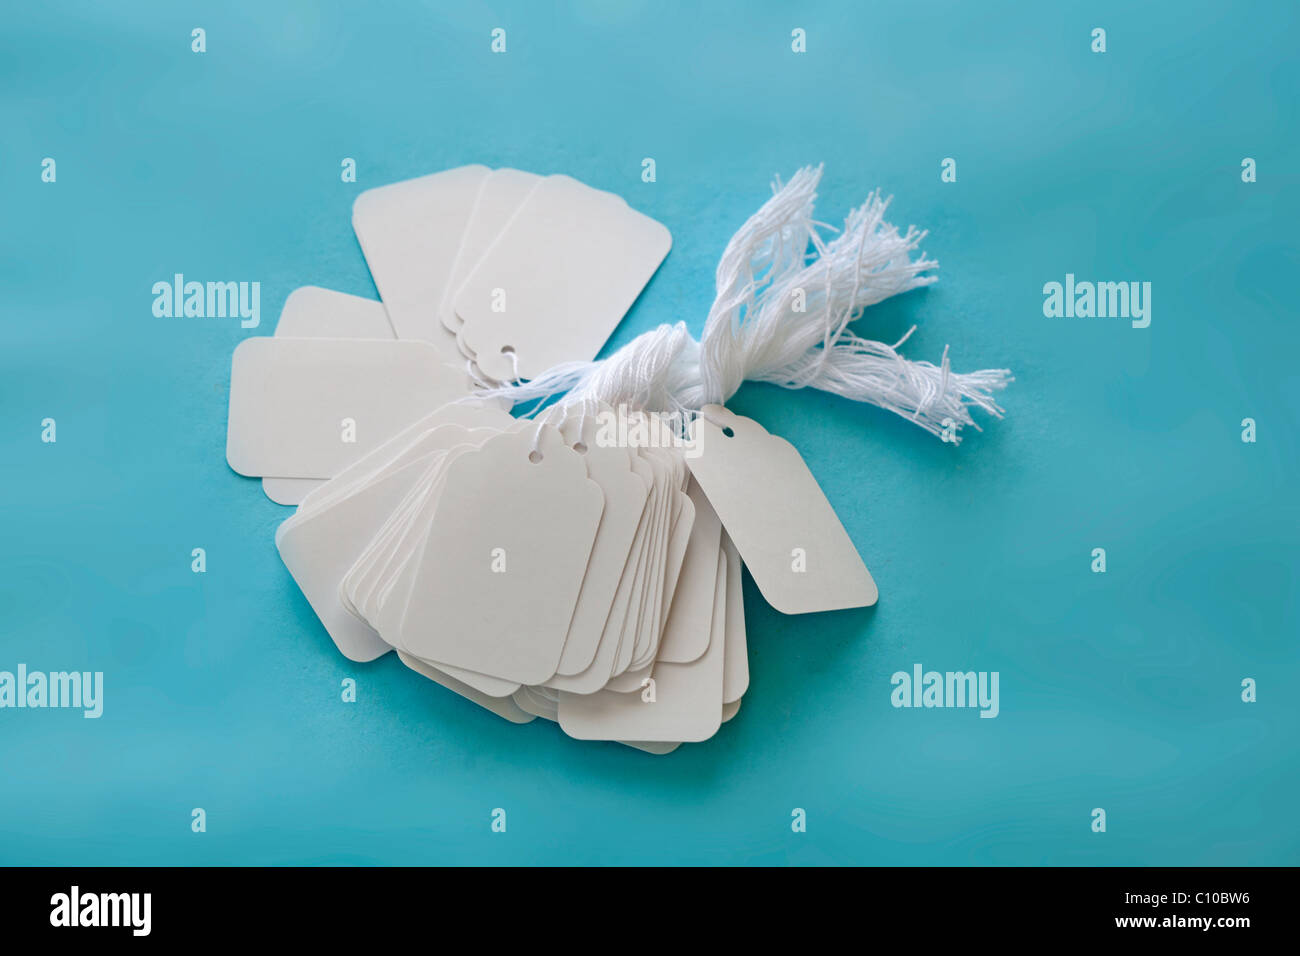 white blank price tags with string on blue surface Stock Photo